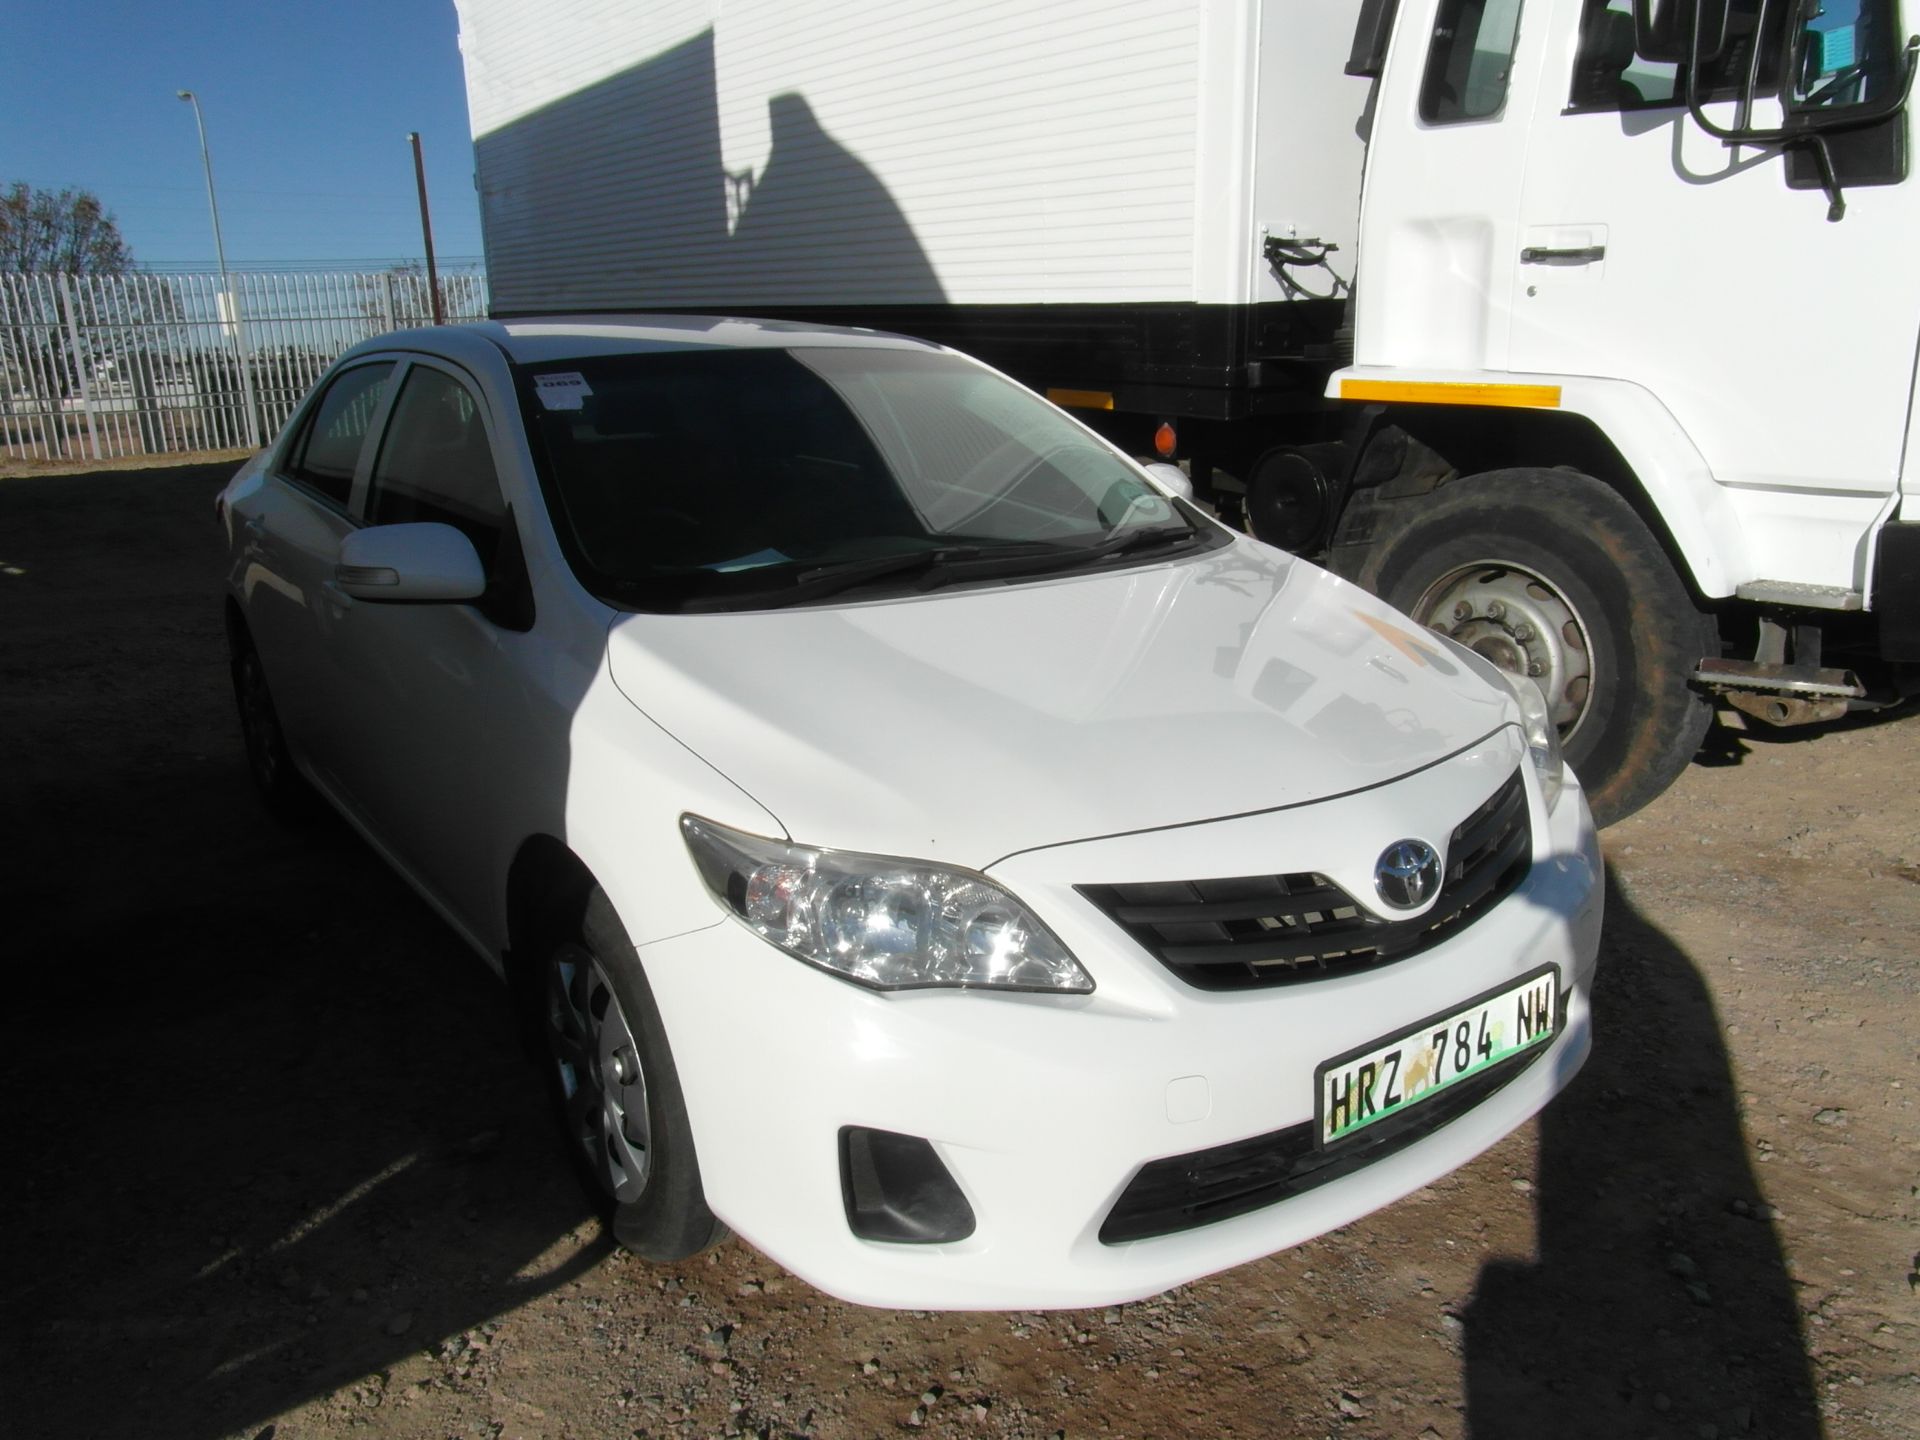 2011 HRZ784NW Toyota Corolla 1.3 Professional (Vin No: AHTLT58E206027539 )(87 385 kms) - Image 2 of 4